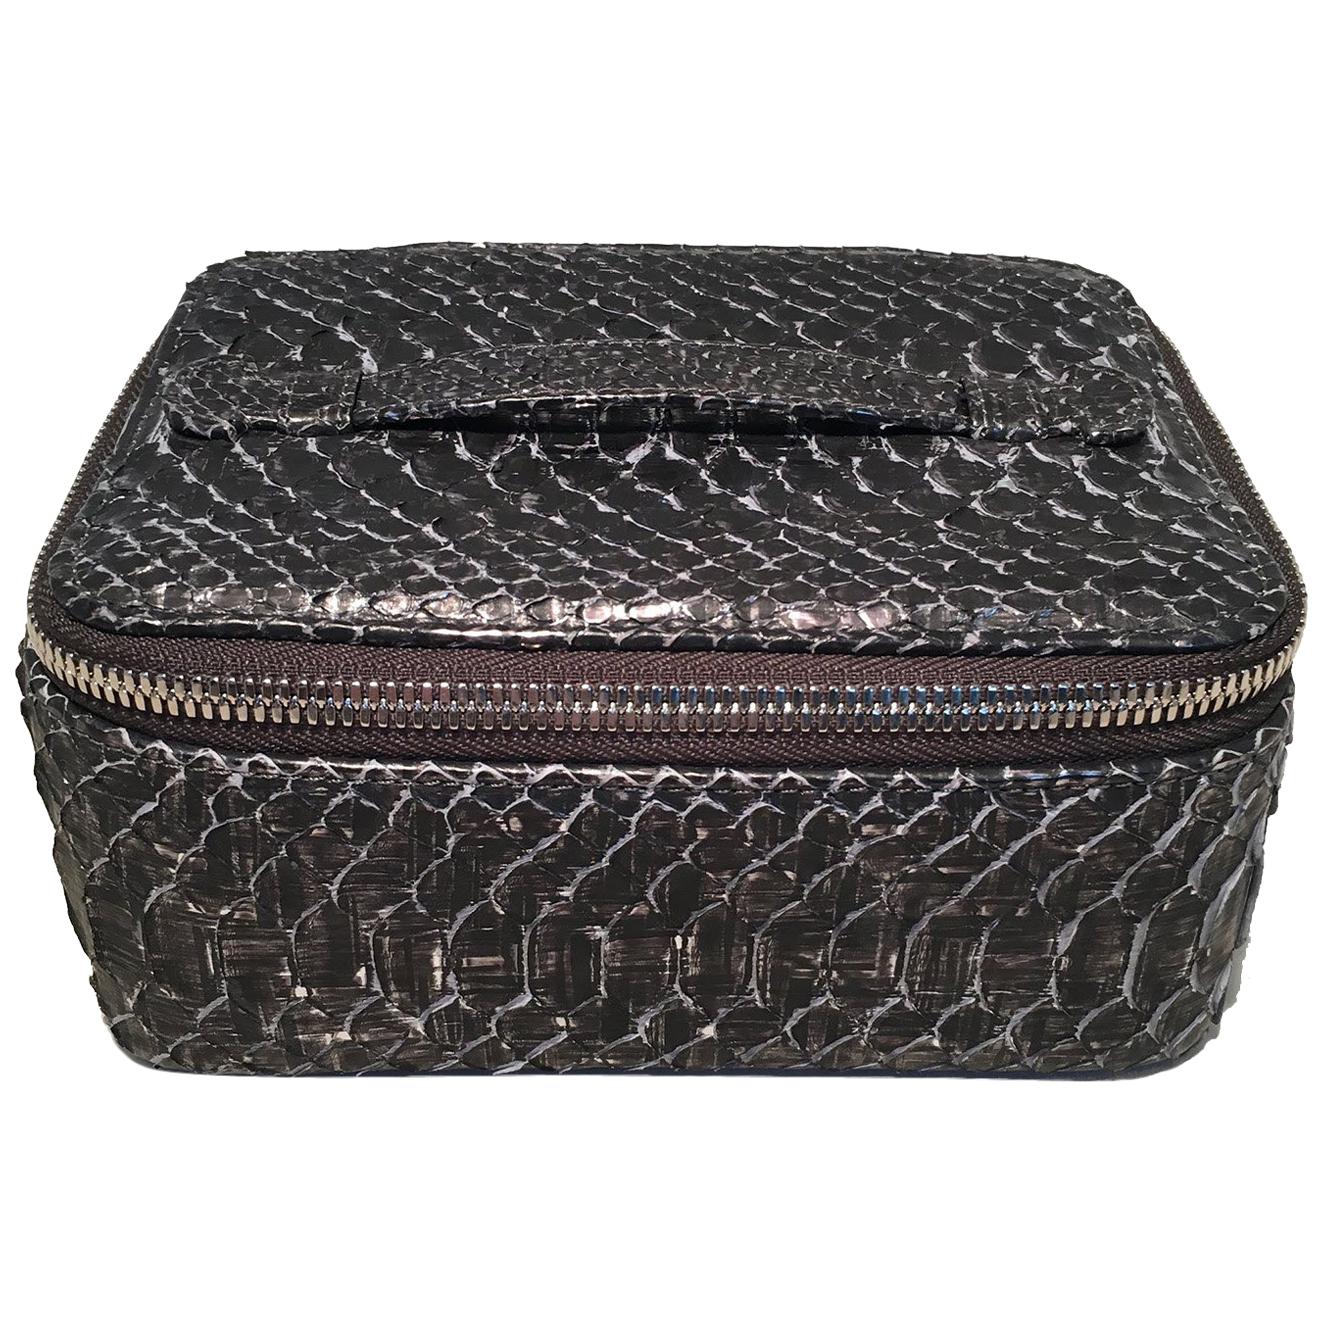 NWT Chanel Gray Python Snakeskin Jewelry Travel Pouch Case with Accessories